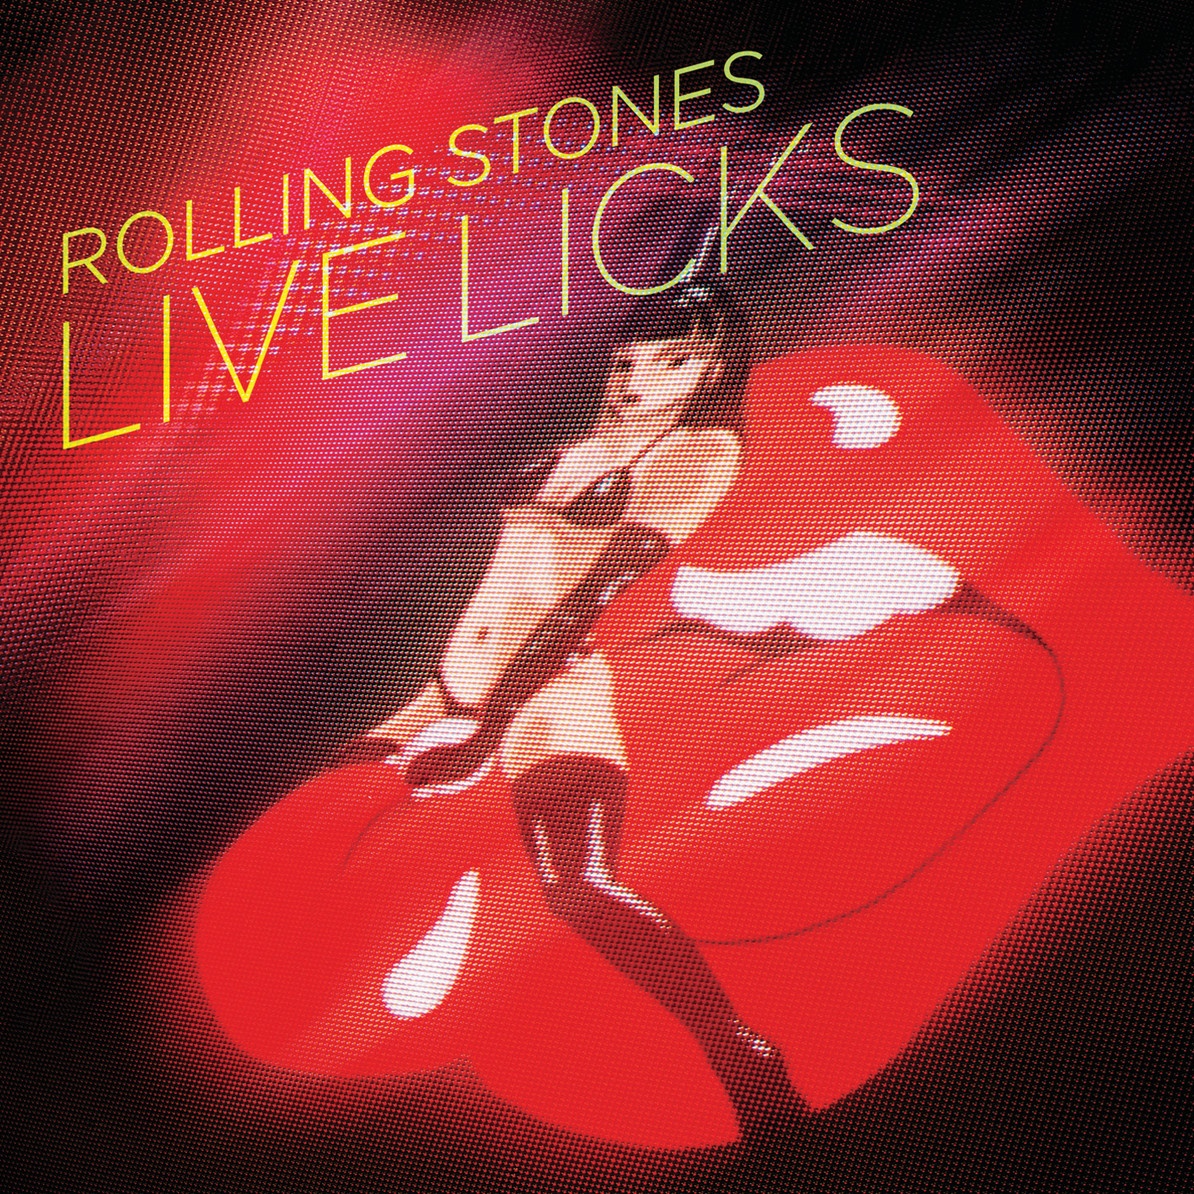 That's How Strong My Love Is - Live Licks Tour - 2009 Re-Mastered Digital Version